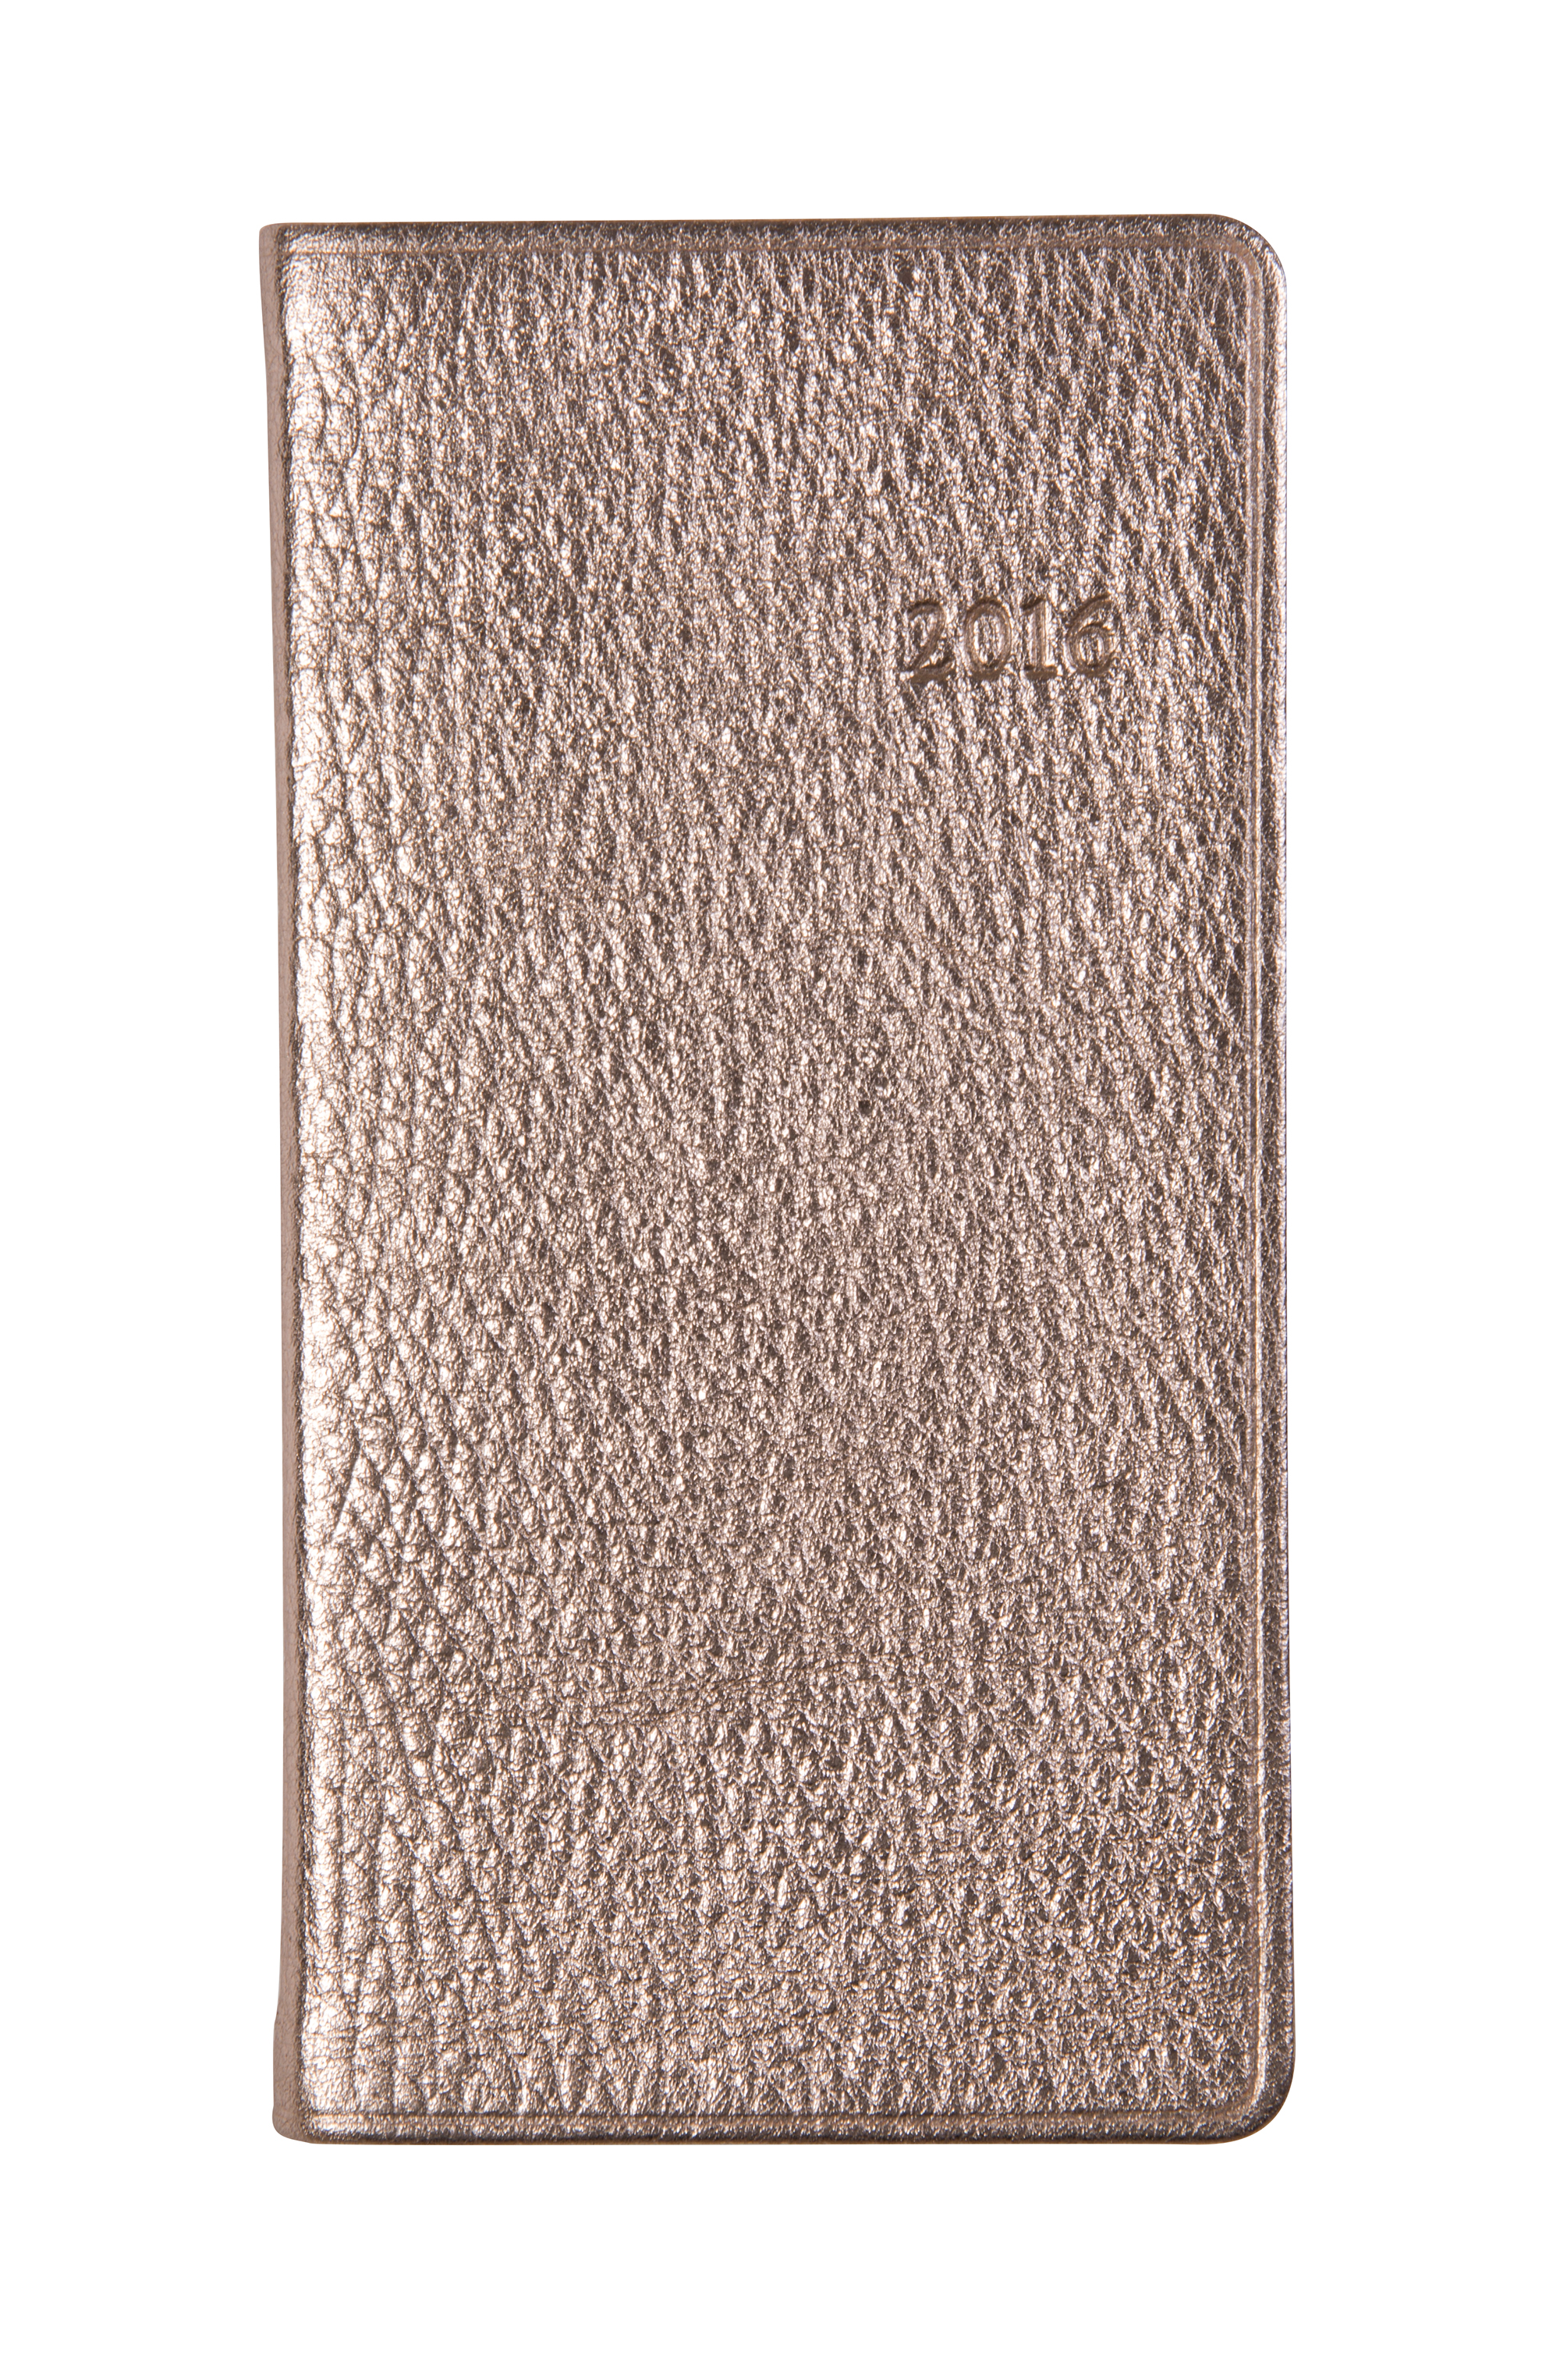 Graphic Image six-inch ”Pocket Datebook” in ”Rose Gold” leather, $40 at Mac &amp; Murphy